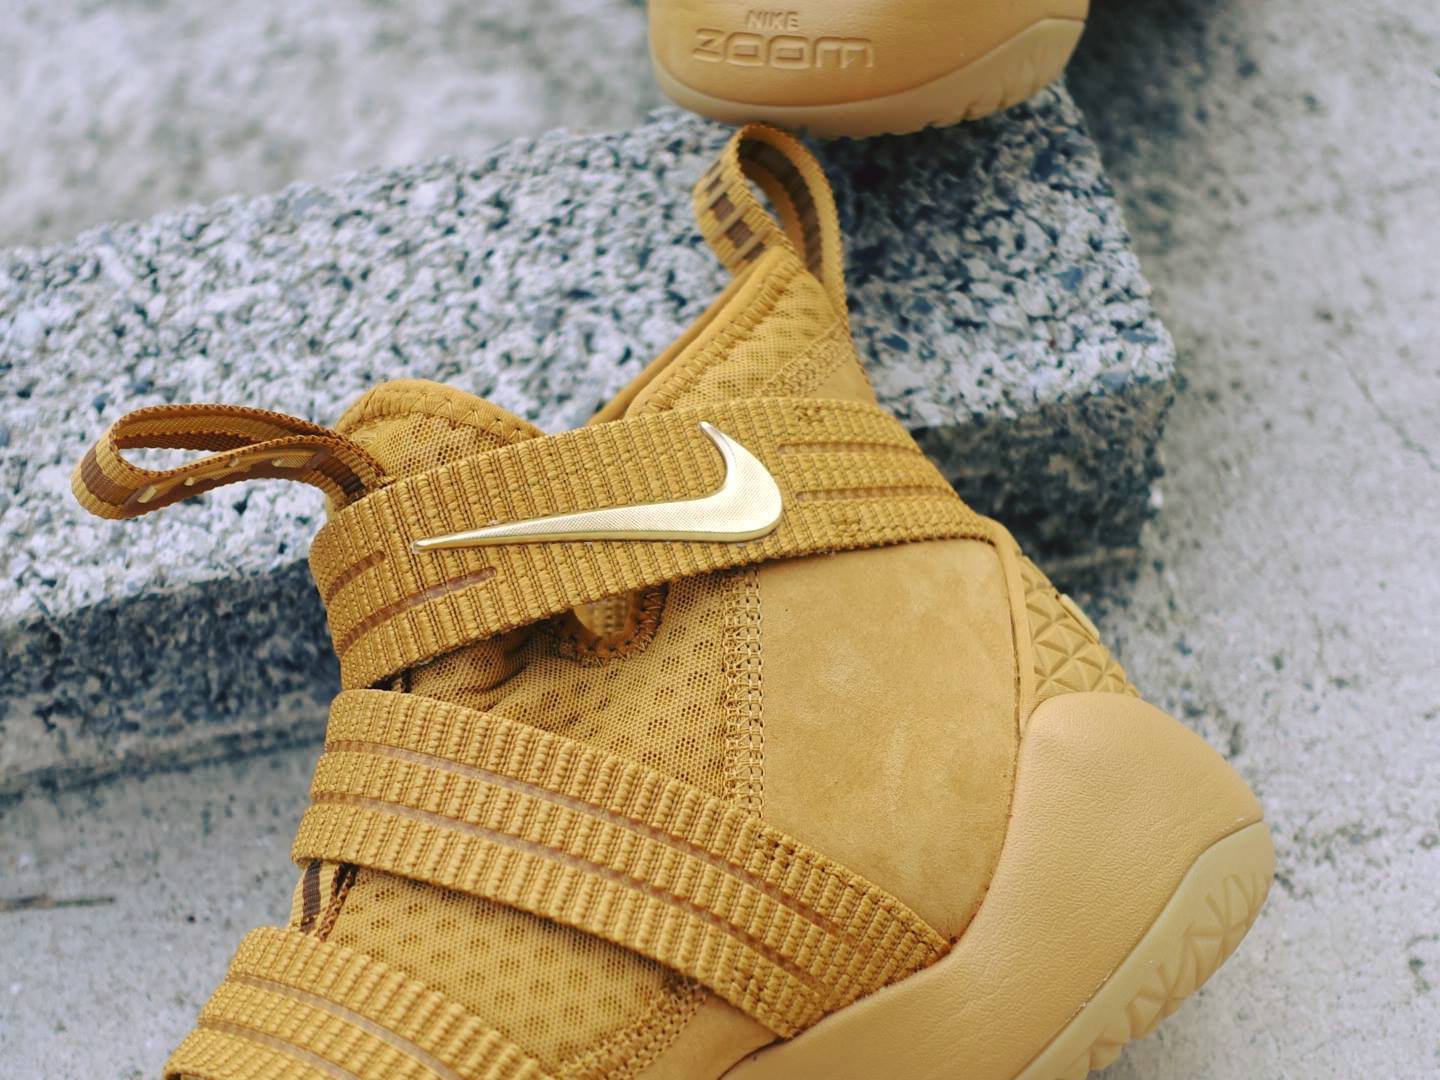 Nike LeBron Soldier 11 SFG Wheat Release Date 897647-700 (5)